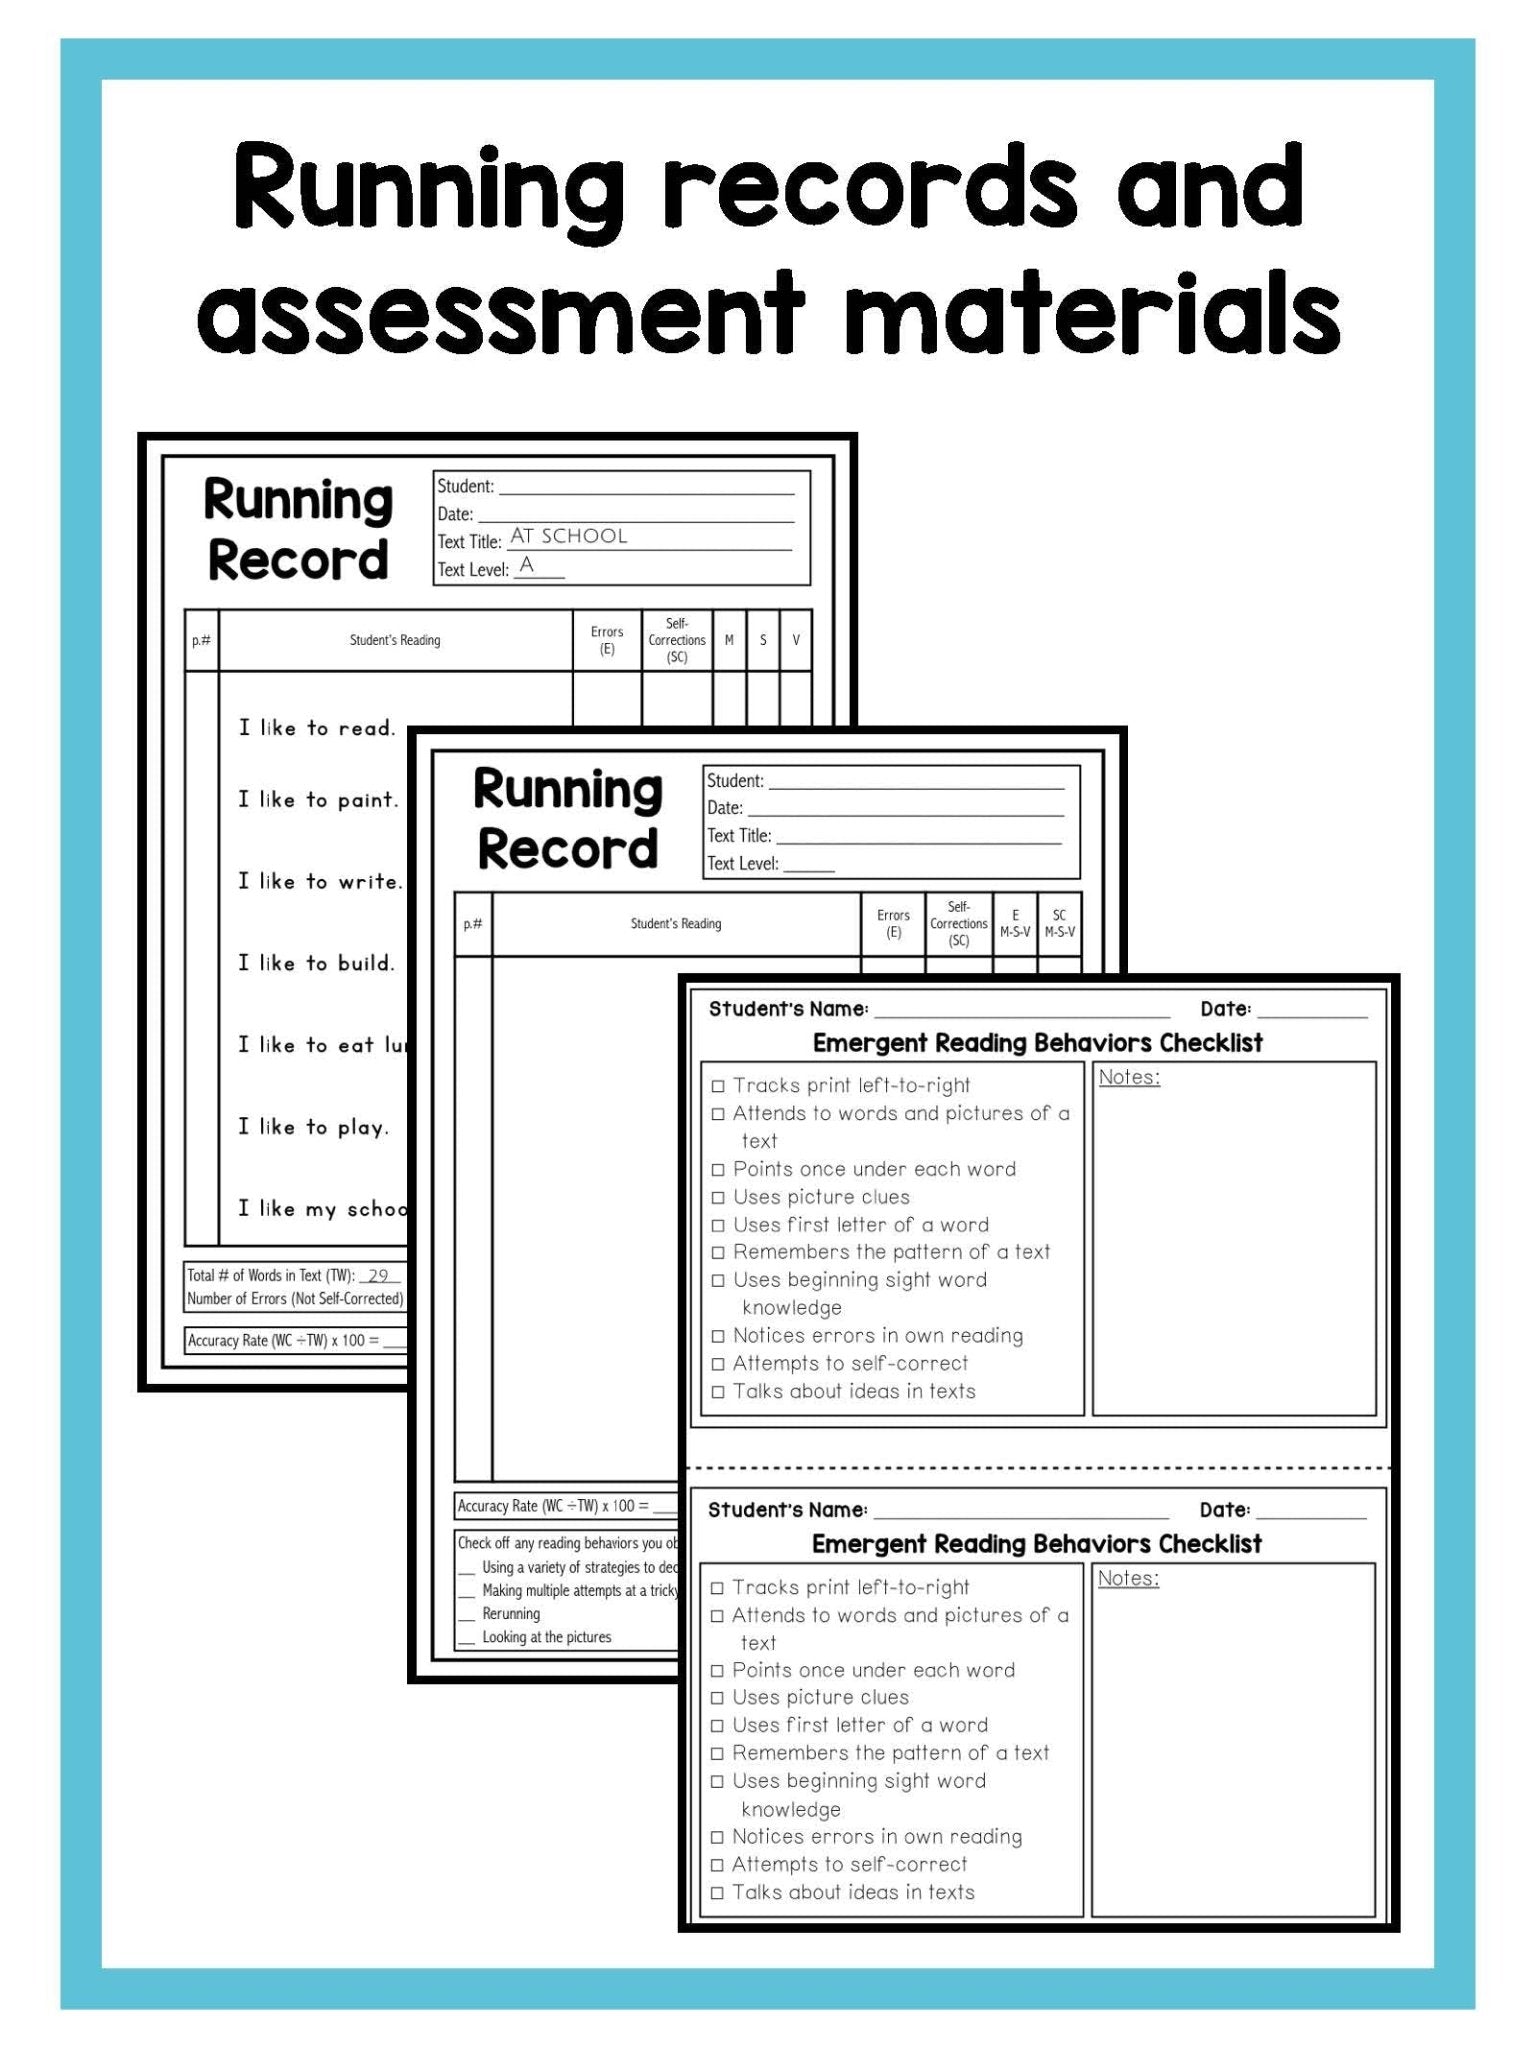 Guided Reading Activities and Lesson Plans for Level A - learning-at-the-primary-pond